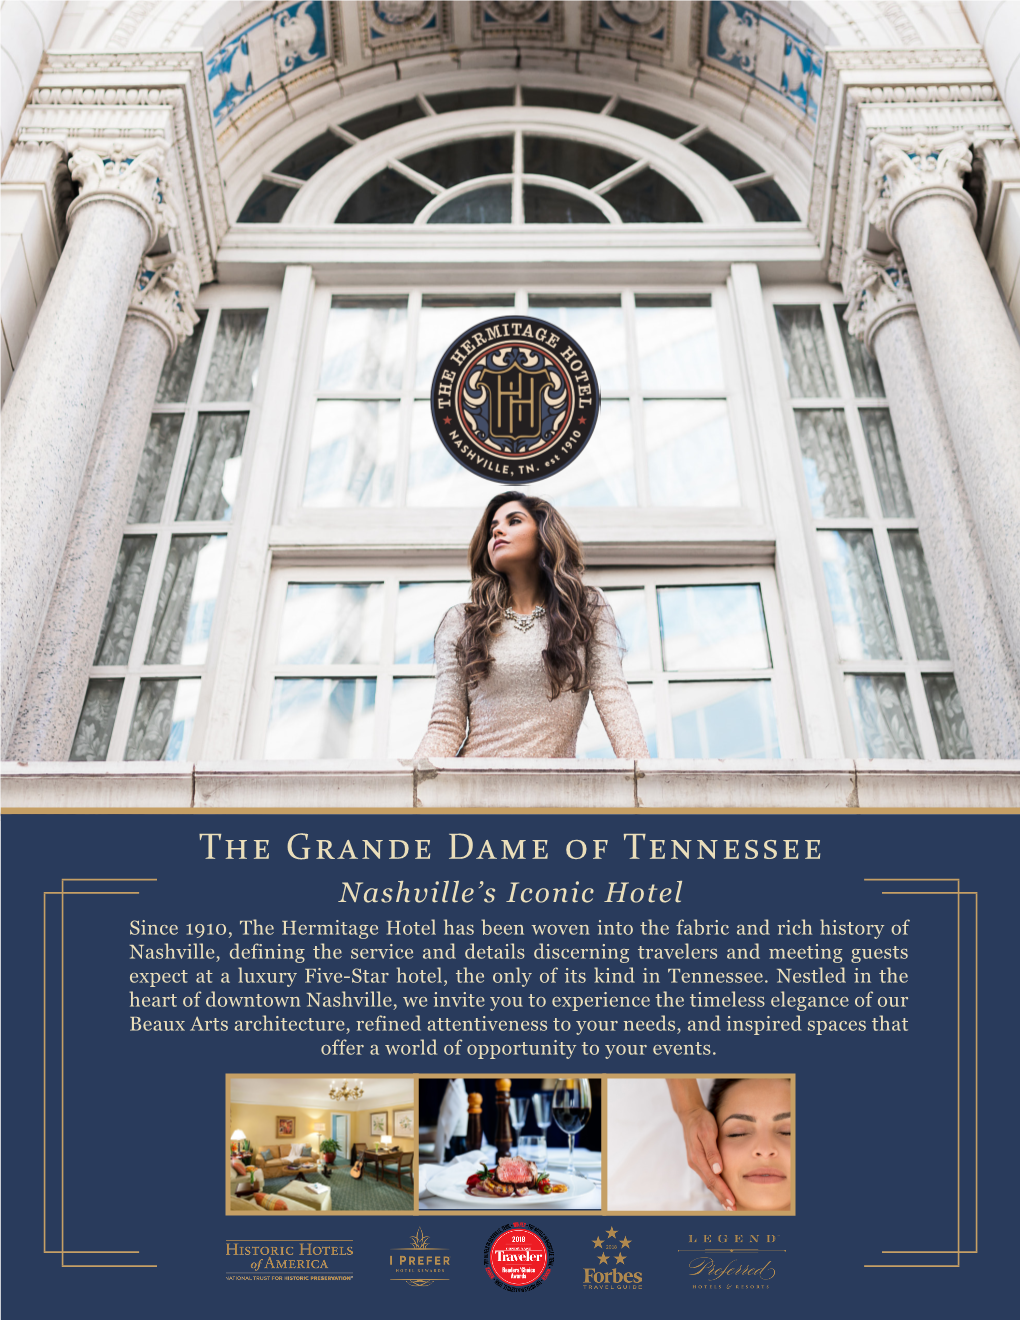 The Grande Dame of Tennessee